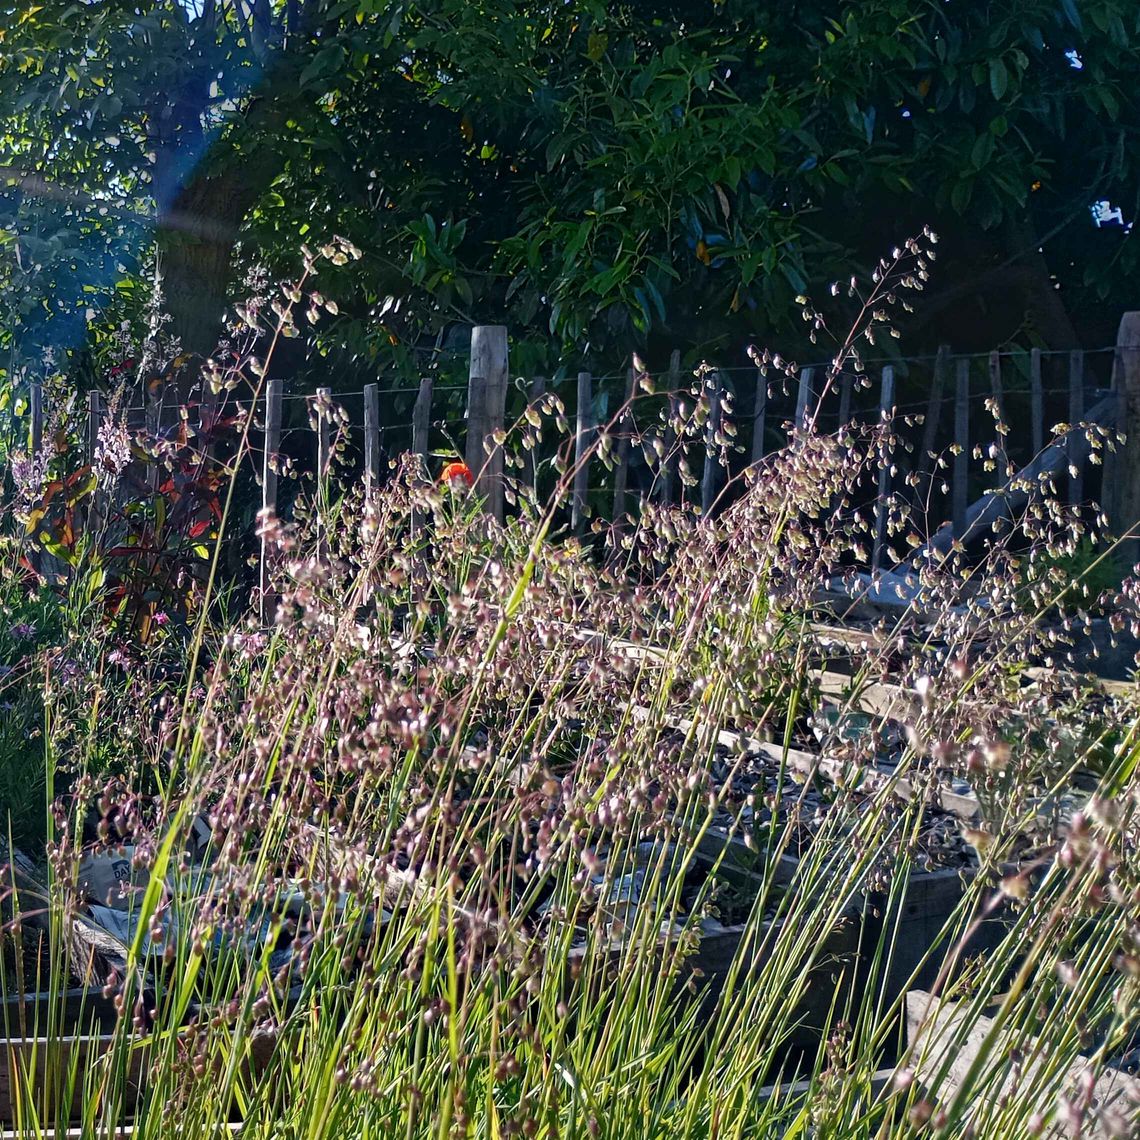 Briza media 'quaking grass':  Briza media 'Quaking Grass': Ethereal ornamental grass with delicate, shimmering seedheads that dance in the breeze. Easy to grow, drought-tolerant annual perfect for adding airy texture and romantic movement to gardens, bouquets and dried arrangements.